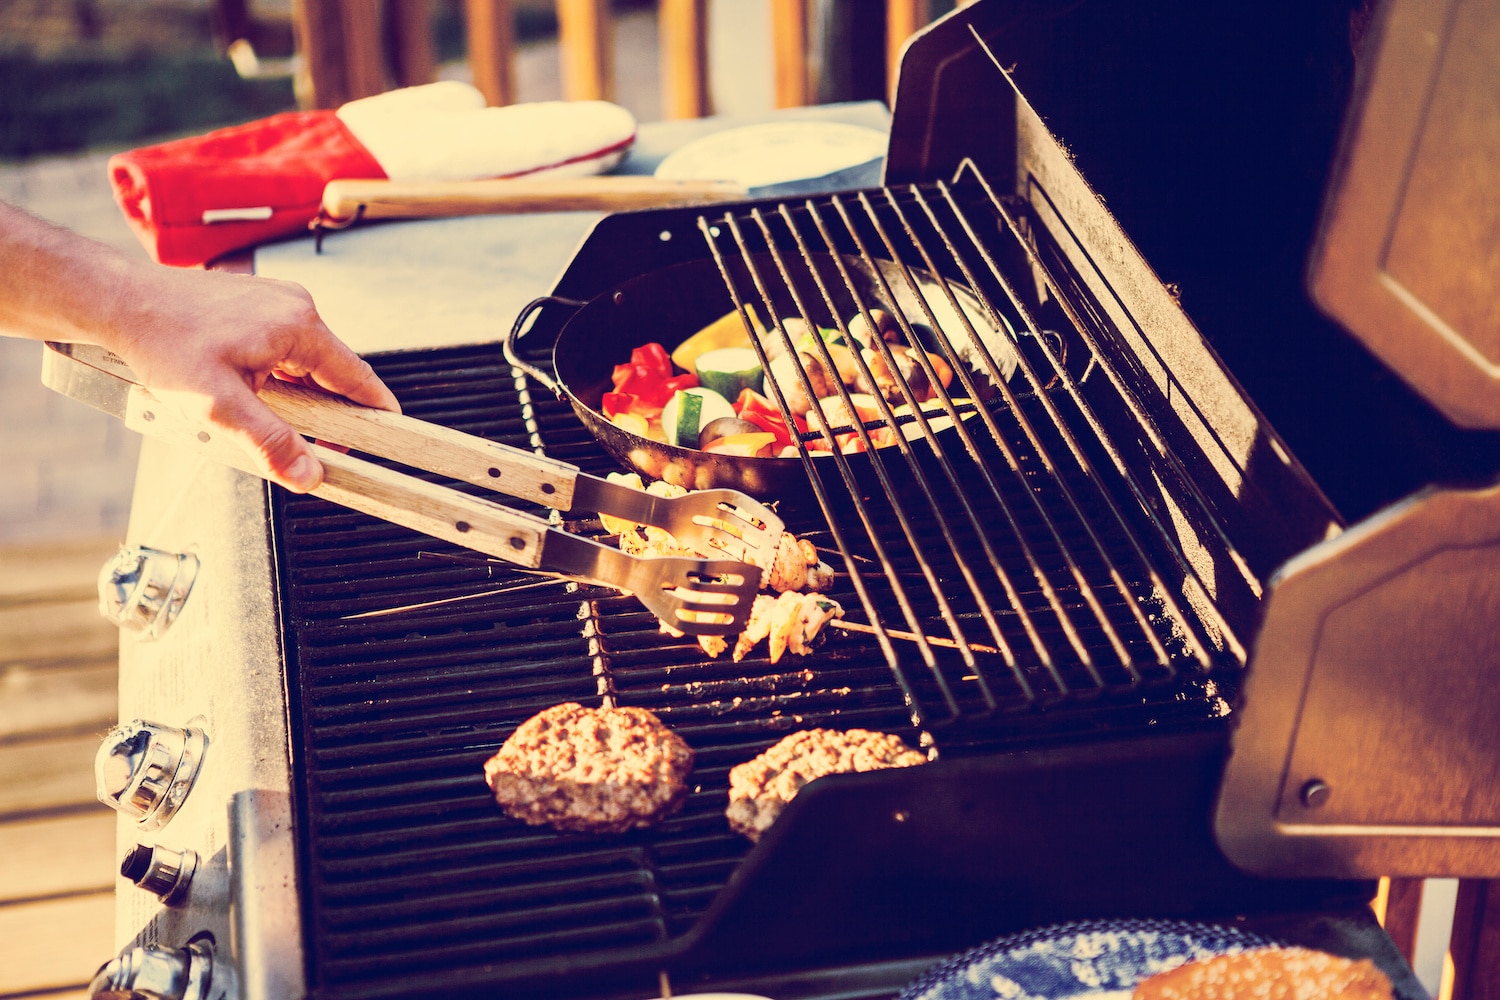 protect deck from grill, Guide to Safely Grilling on Your Outdoor Deck